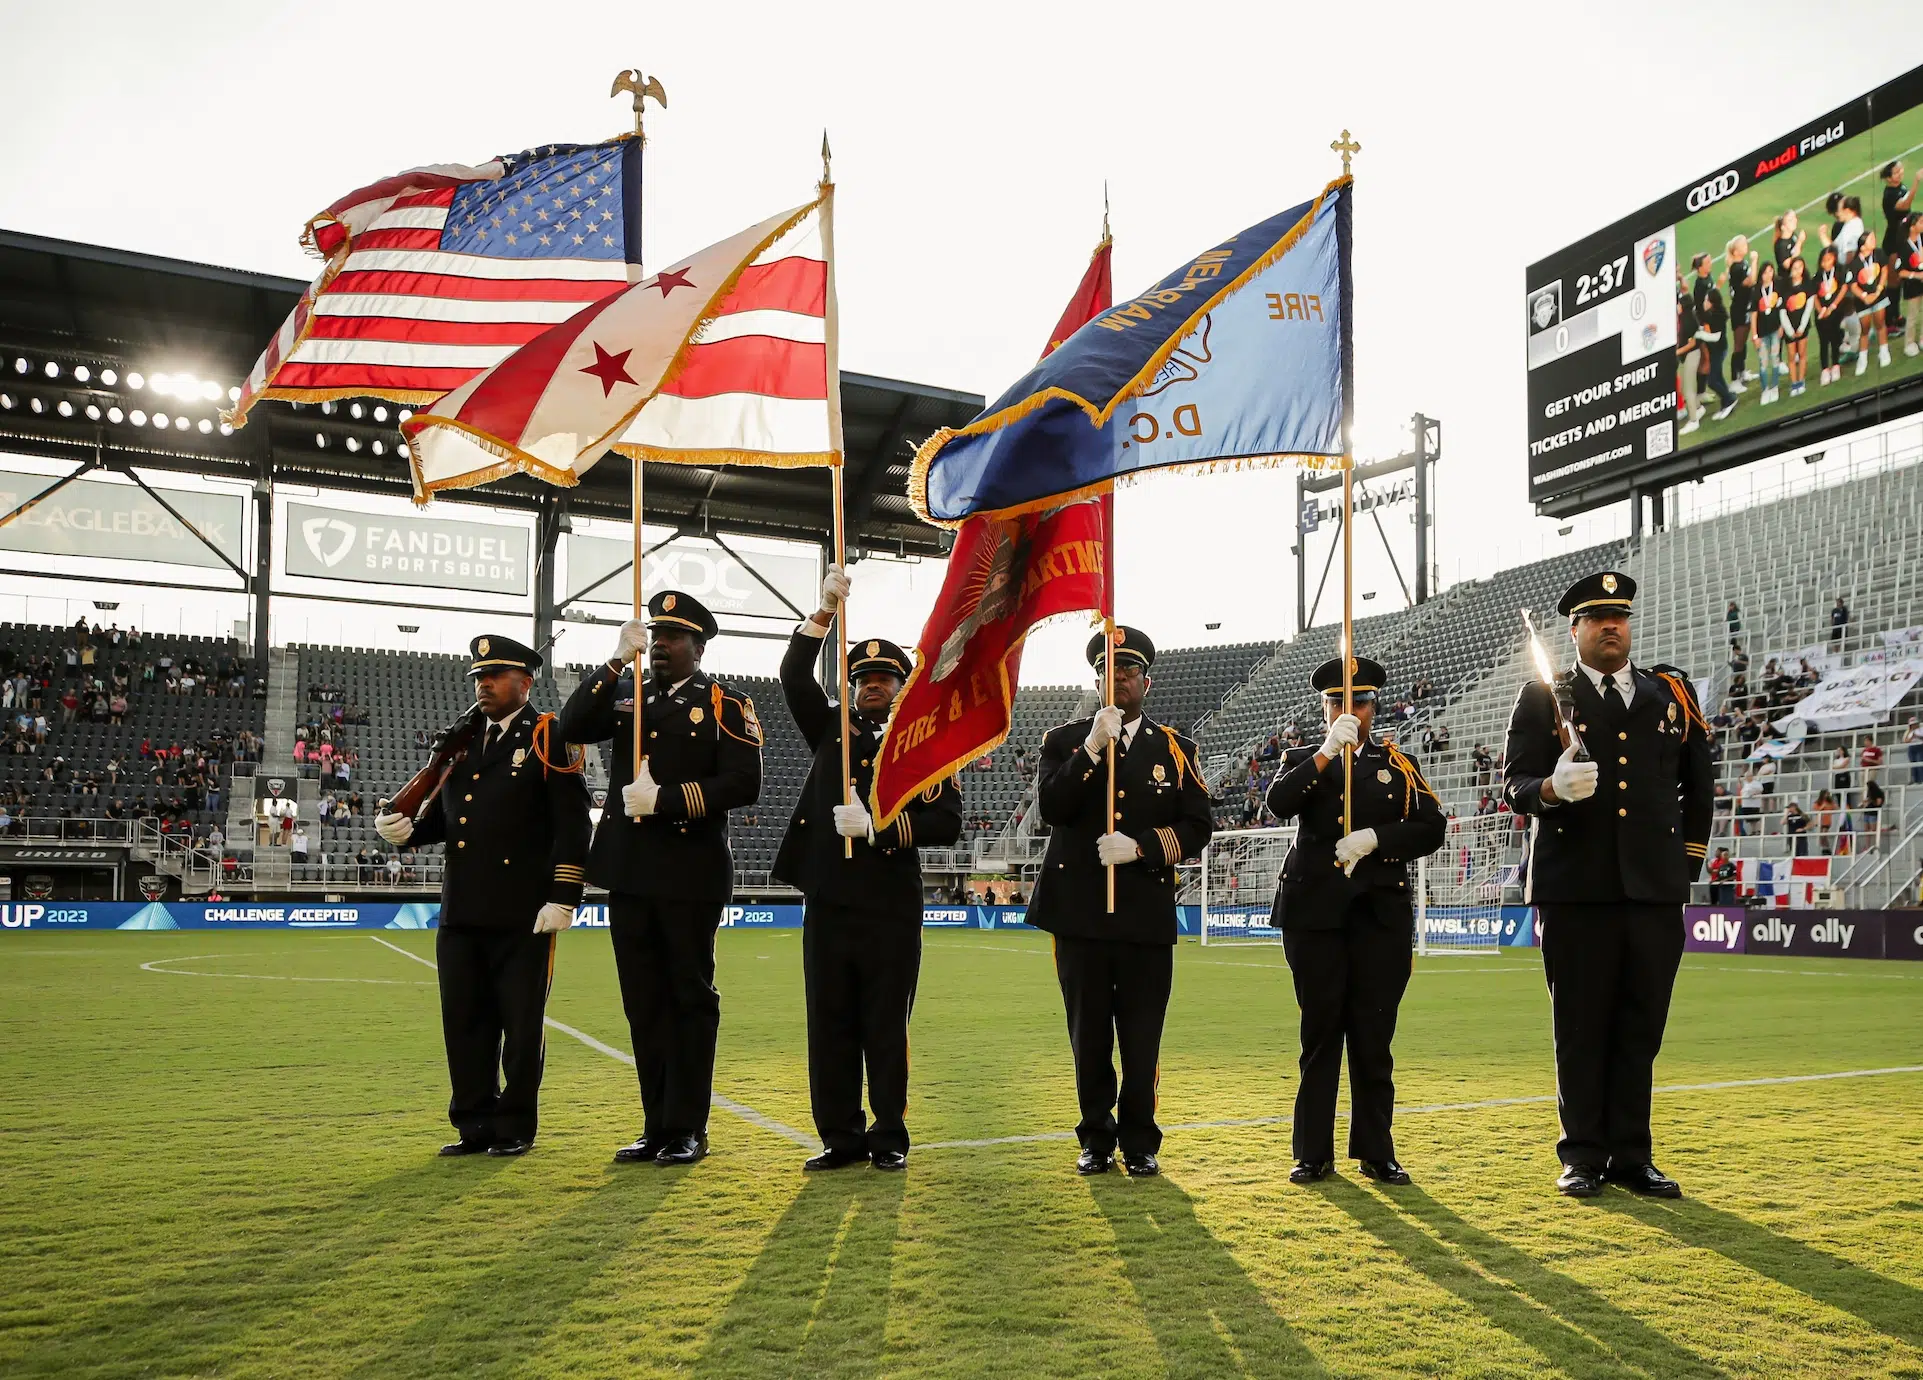 Six uniformed firefighters stand at attention and hold the American, DC, and DC Fire Department flags on a soccer field.